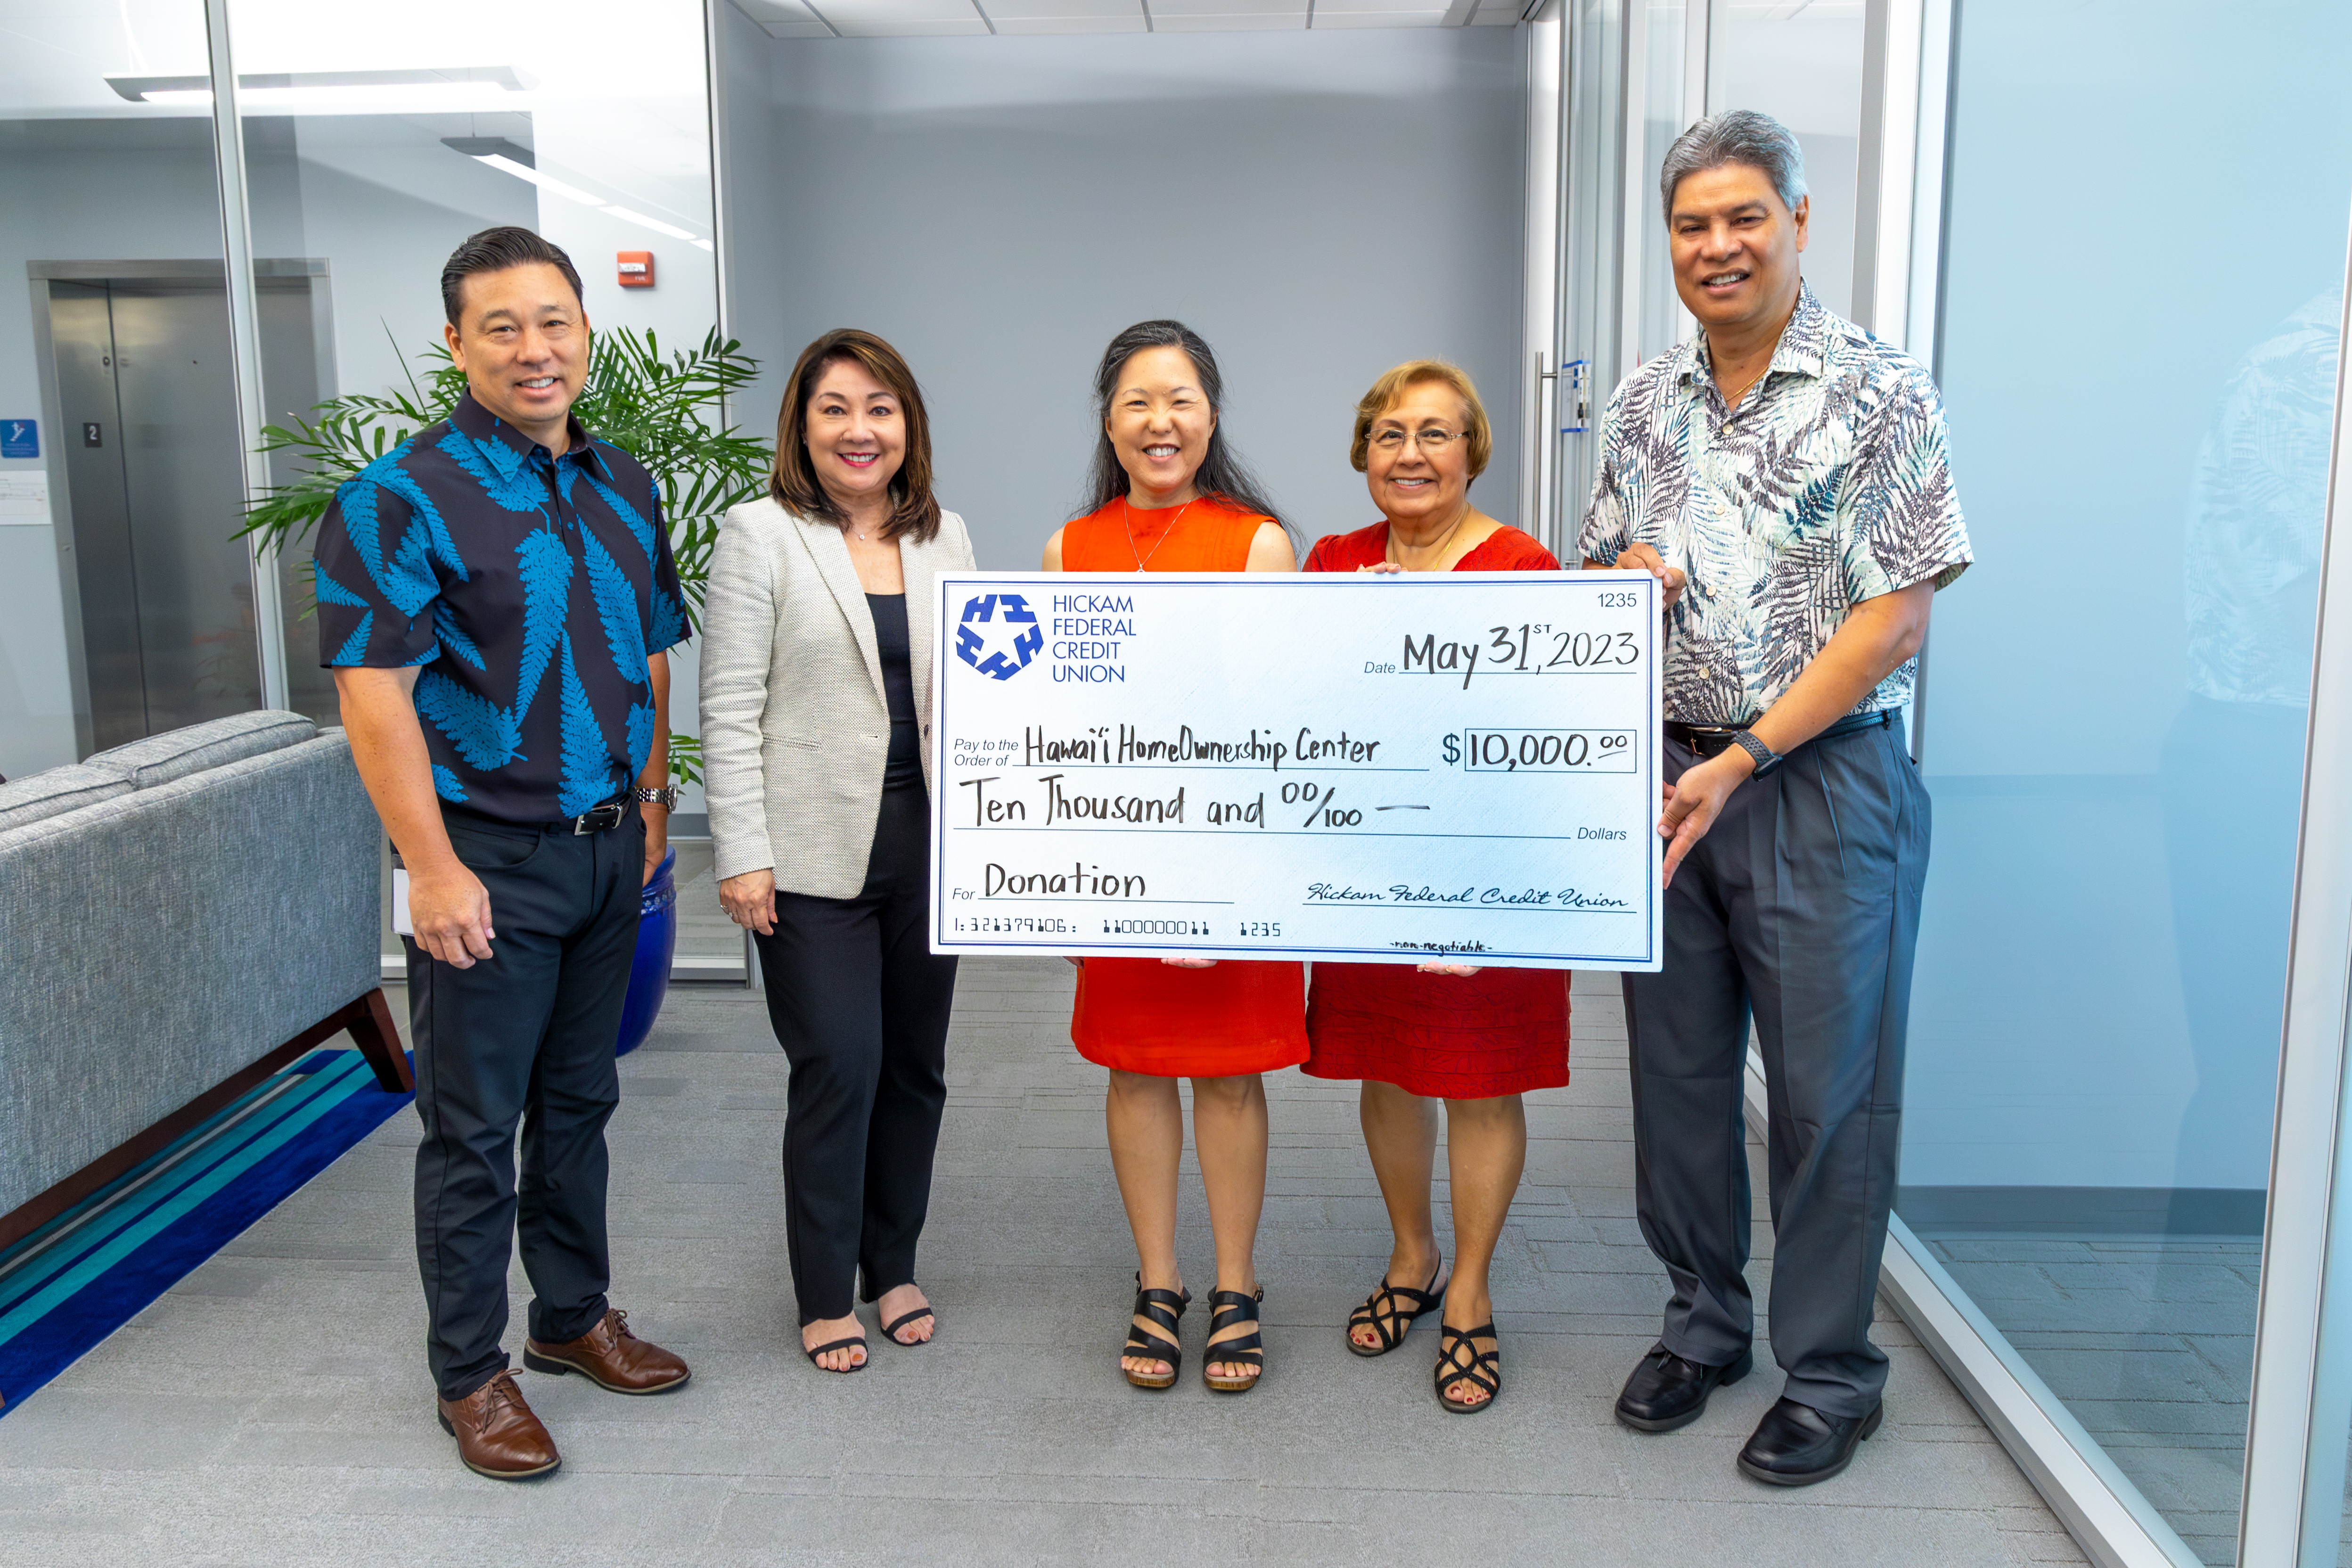 Hickam FCU Board Chair and Senior Management Team present a check to Reina from Hawaii HomeOwnership Center.